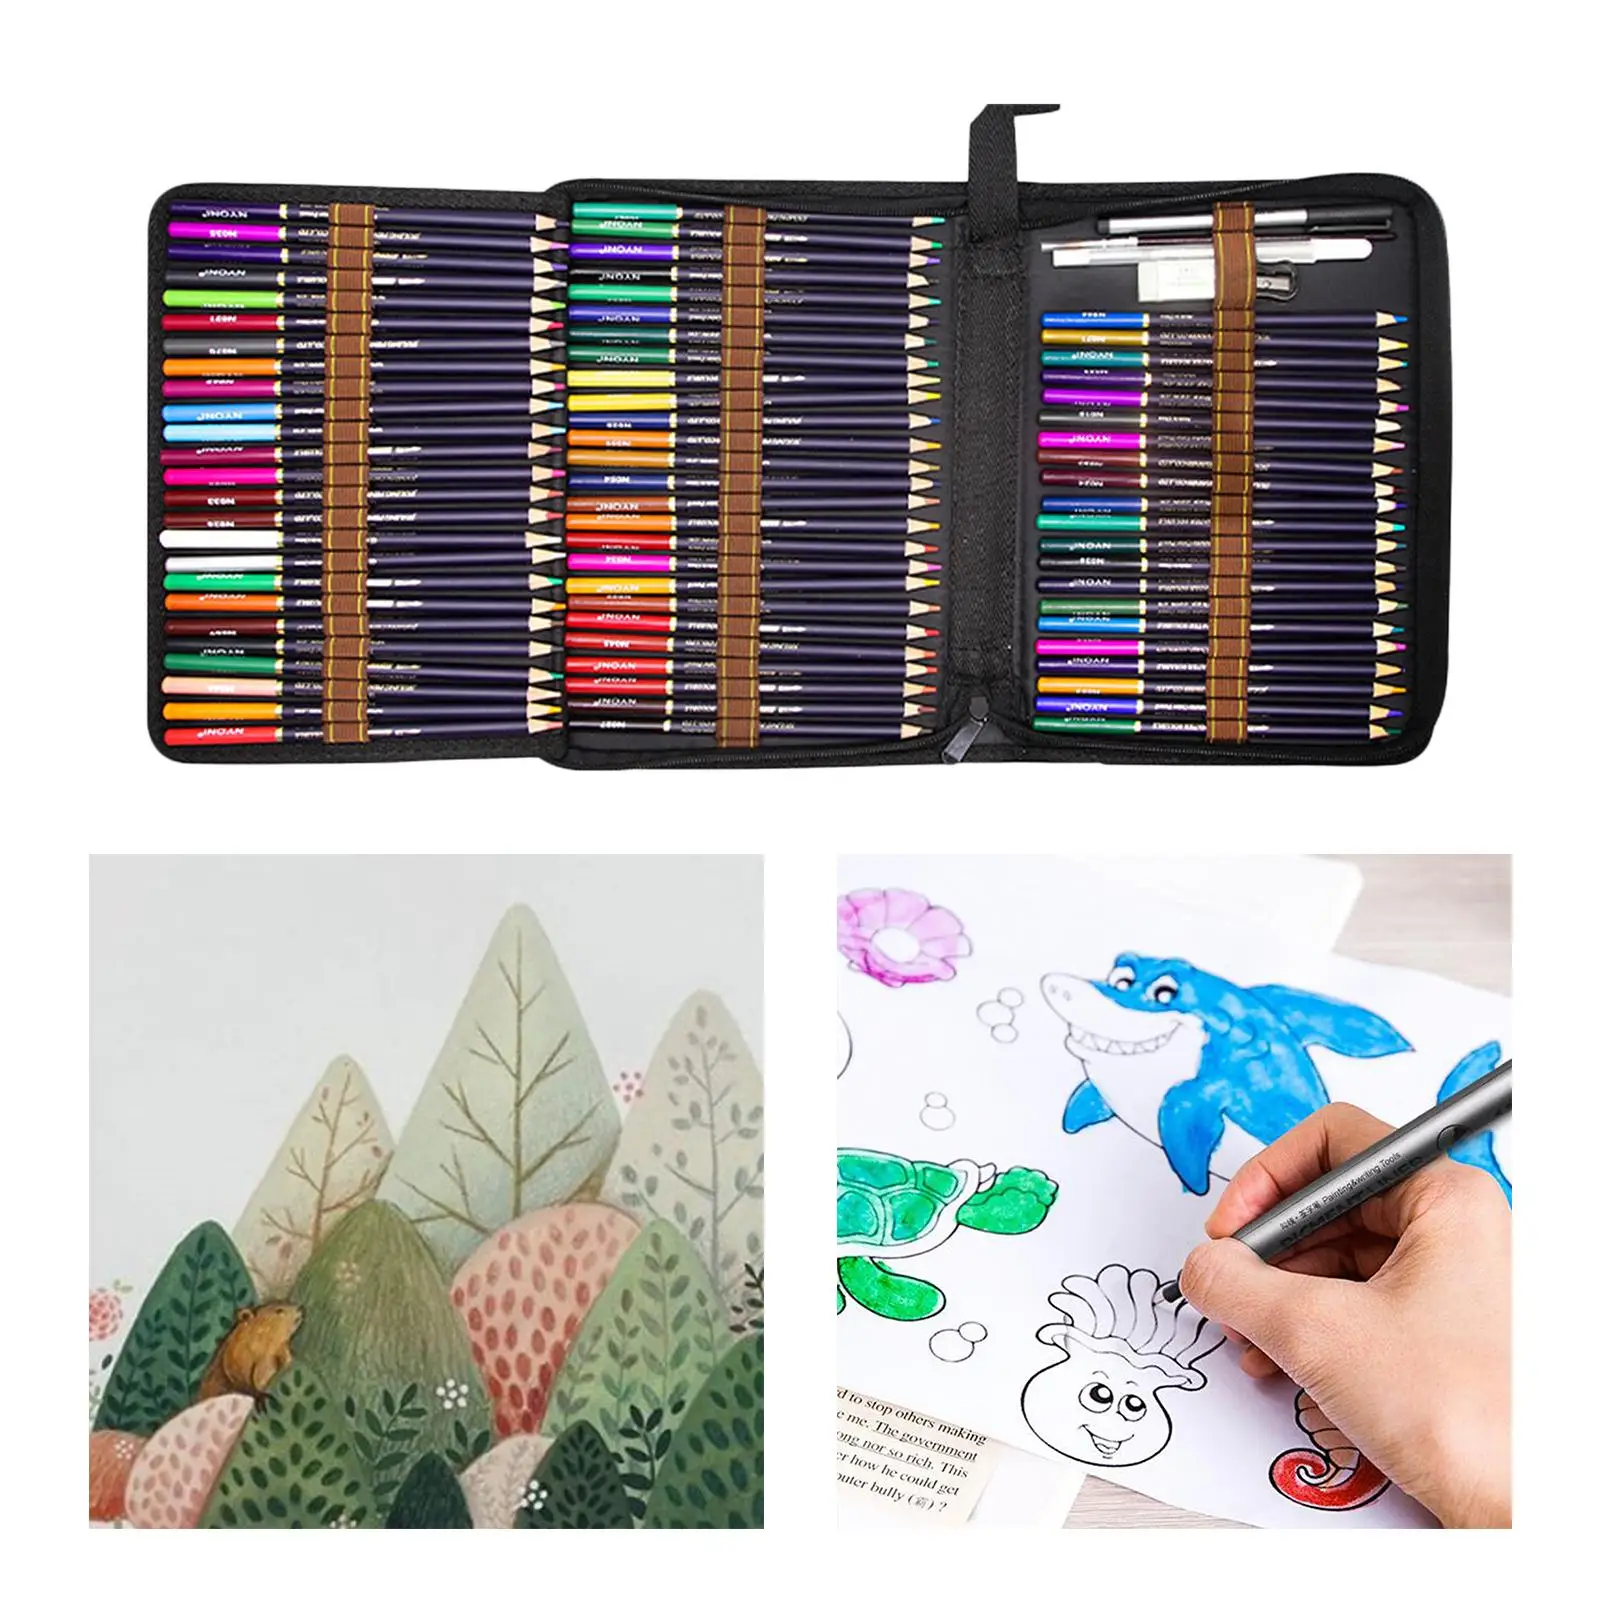 72 Colored Pencils for Coloring Books, Coloring Pencils Set with Vibrant Color, Kids Gifts for Colorist Drawing, Painting